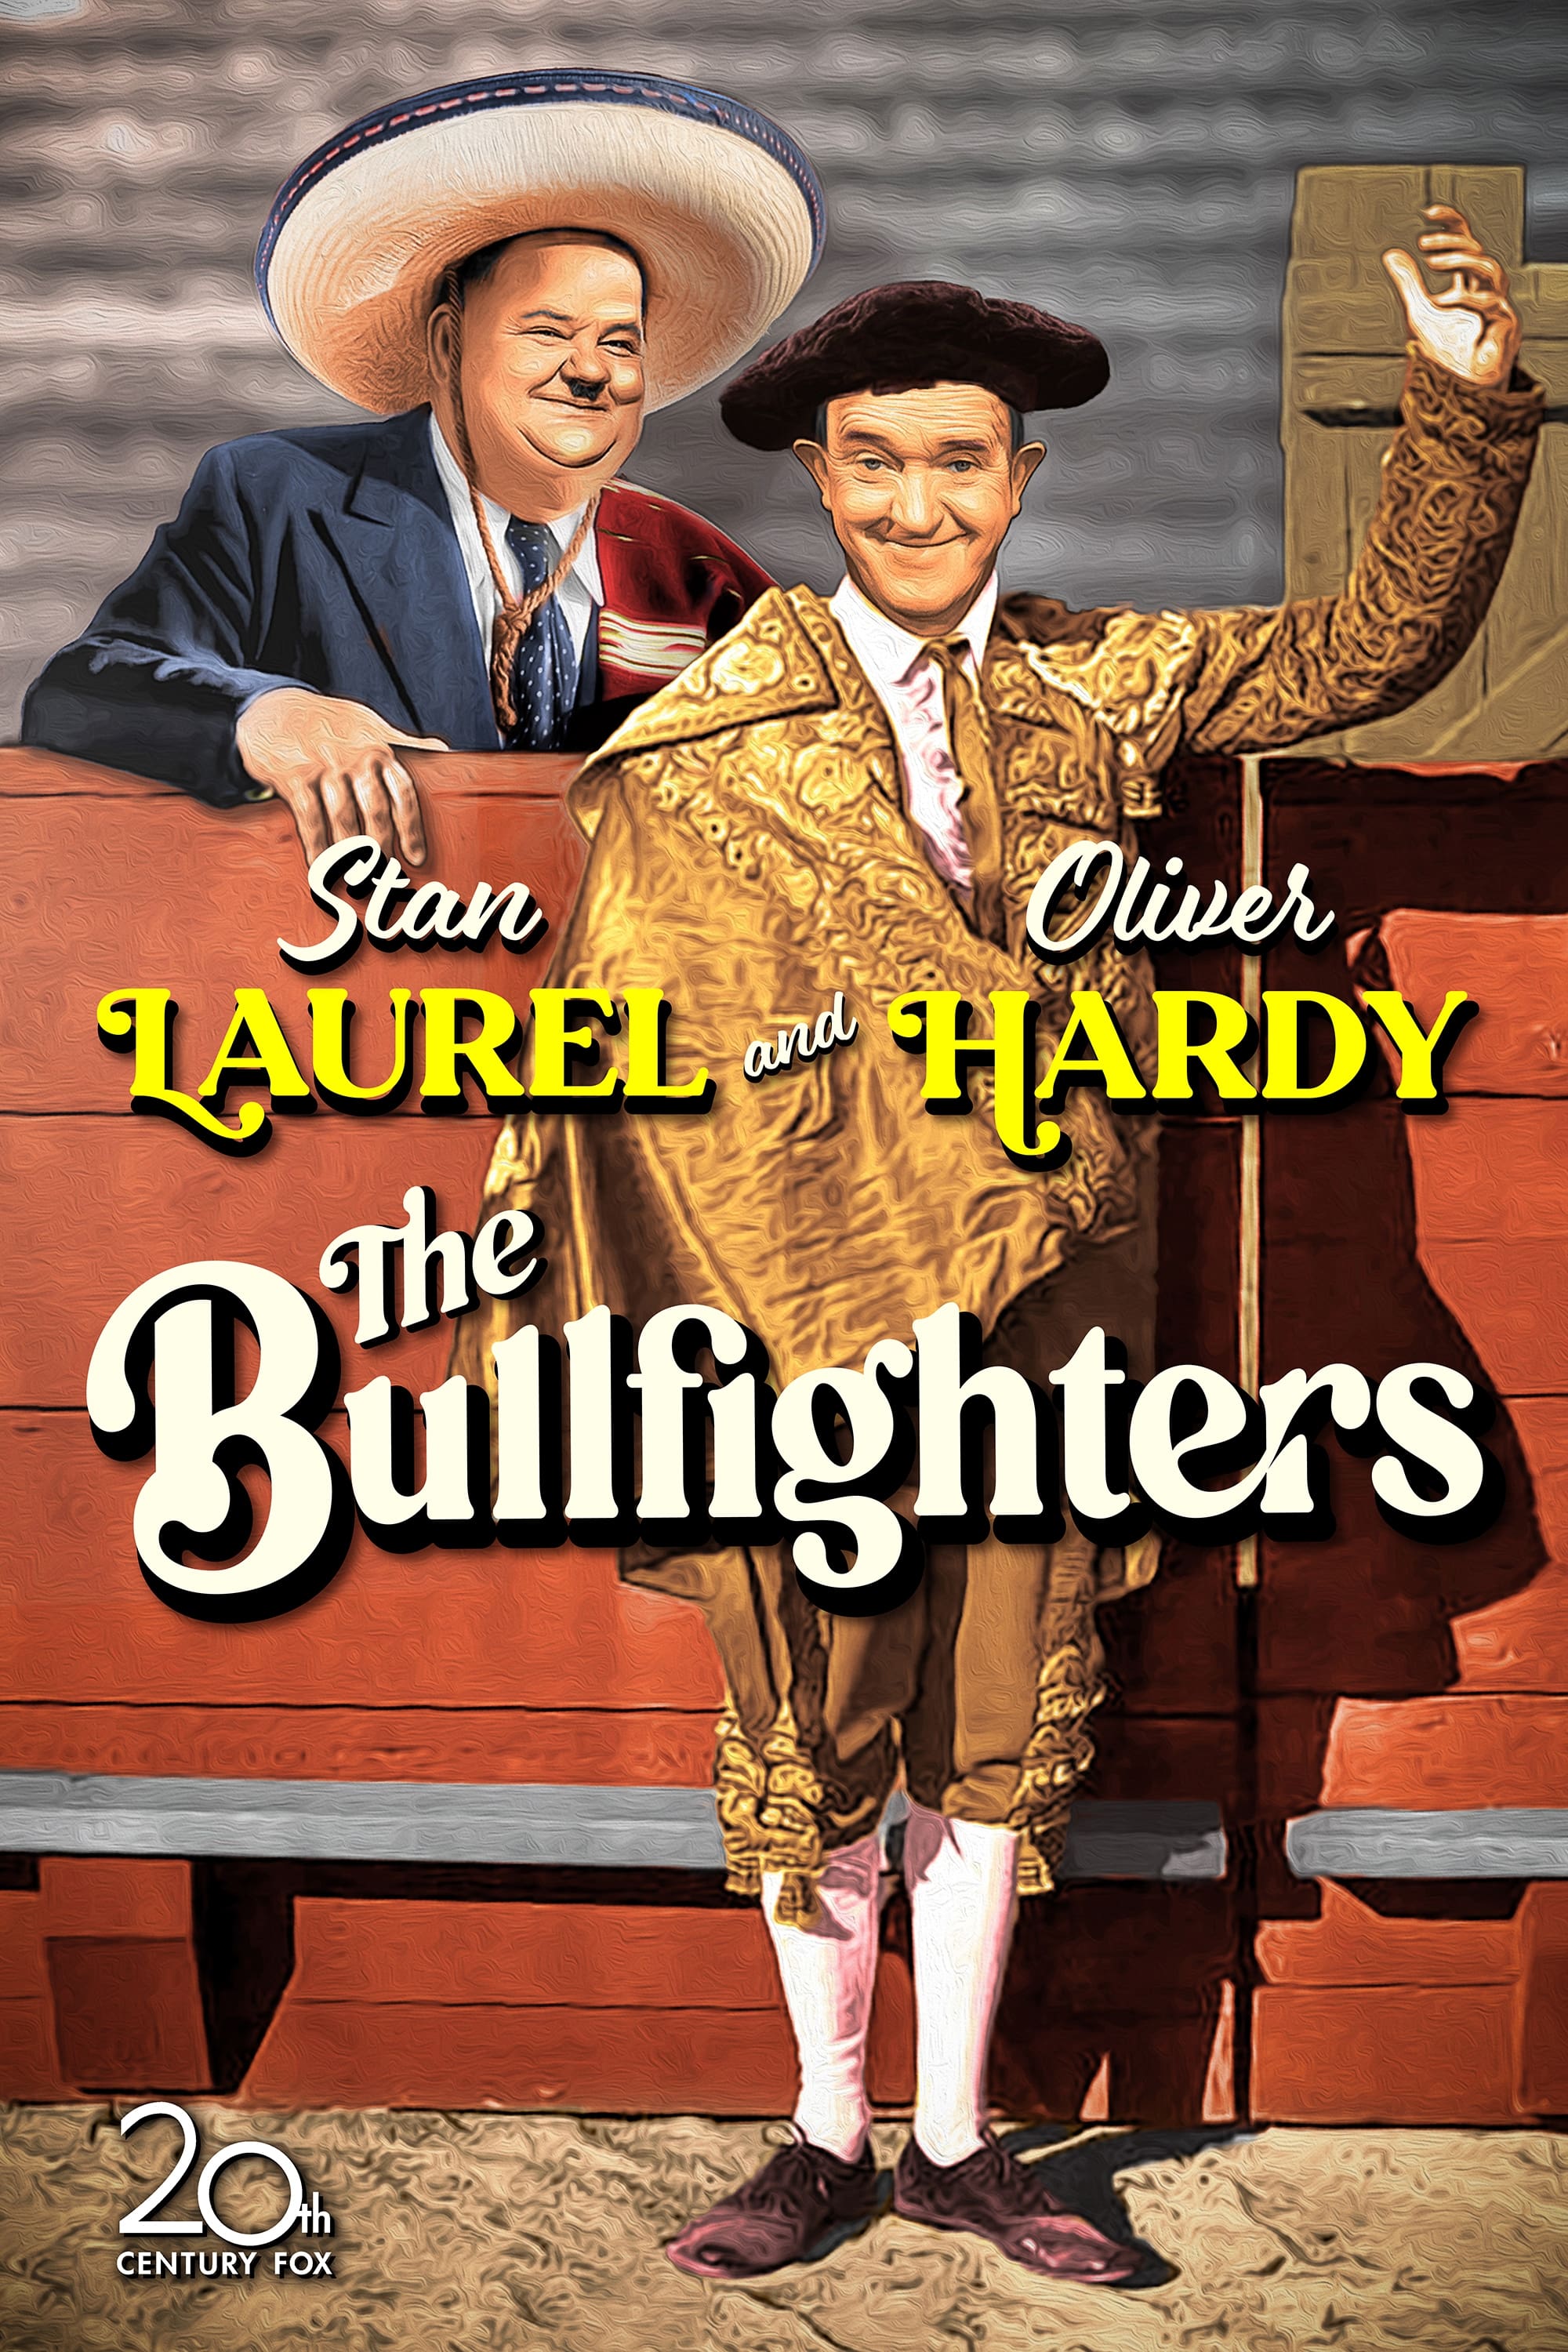 The Bullfighters (1945)